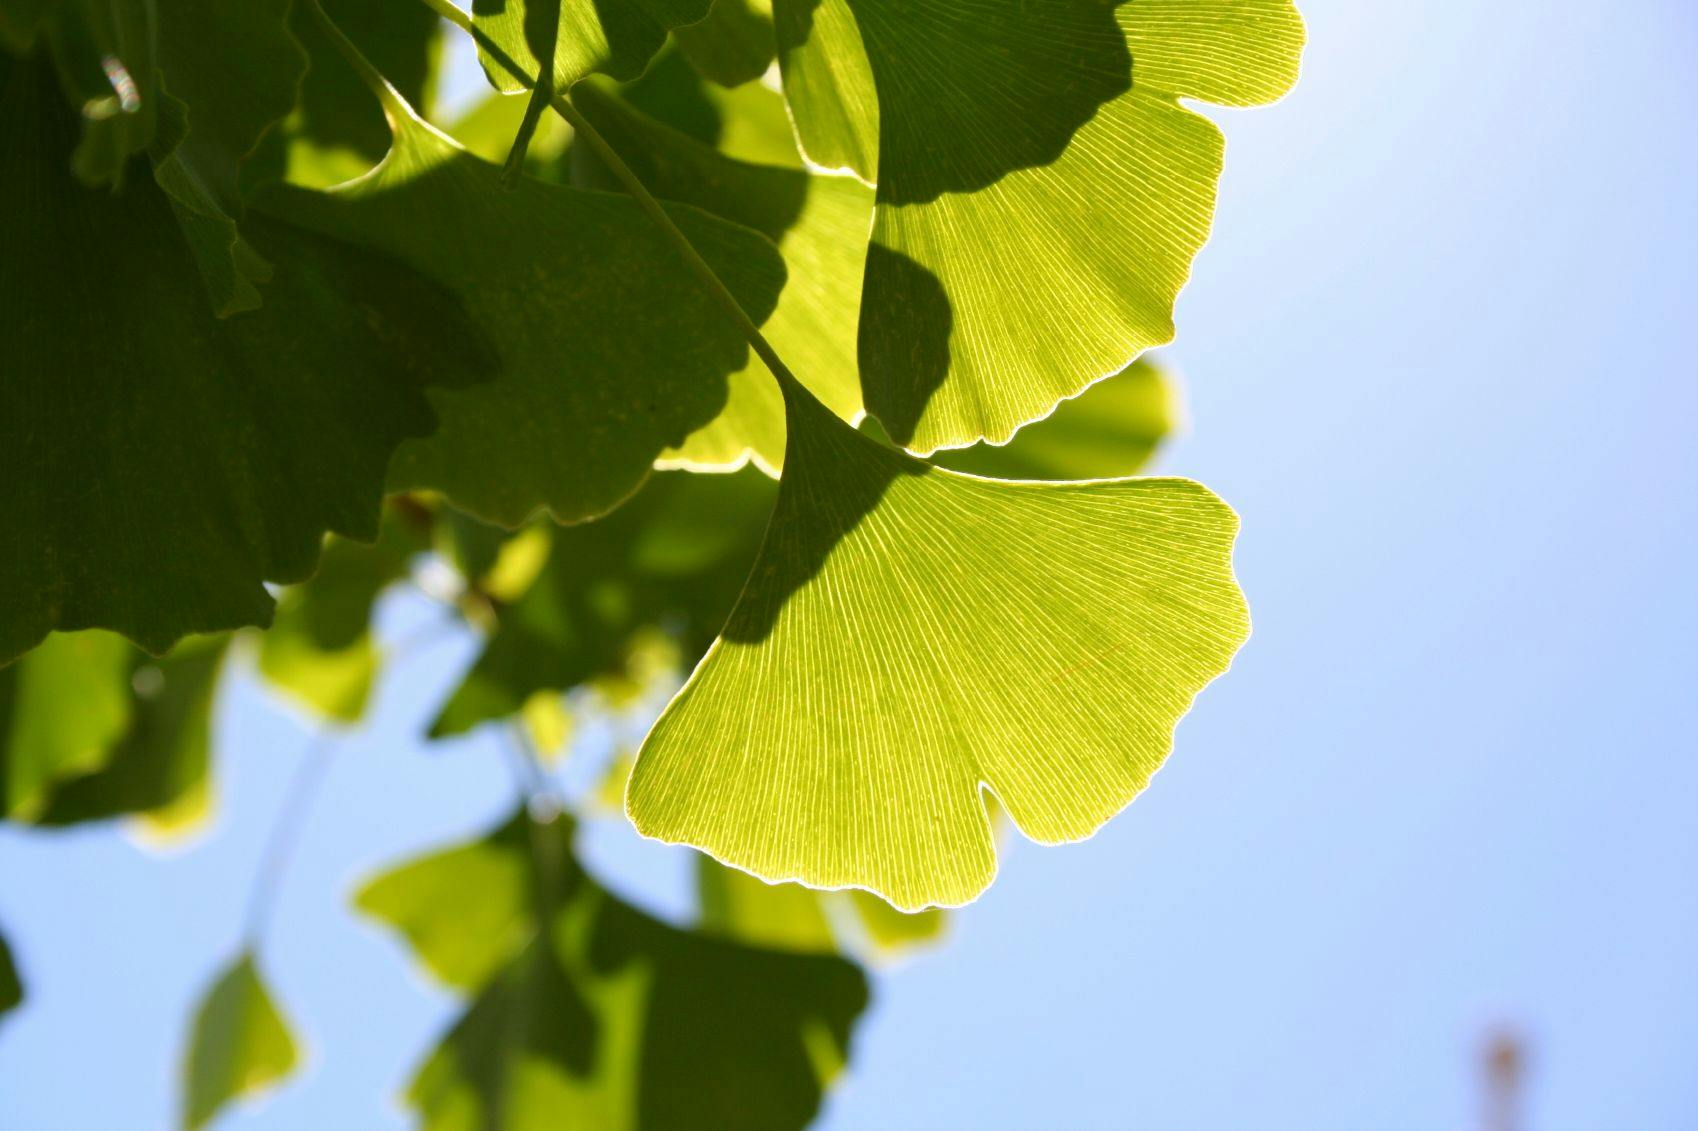 Standard Ginkgo Extracts are Safe, Says ABC